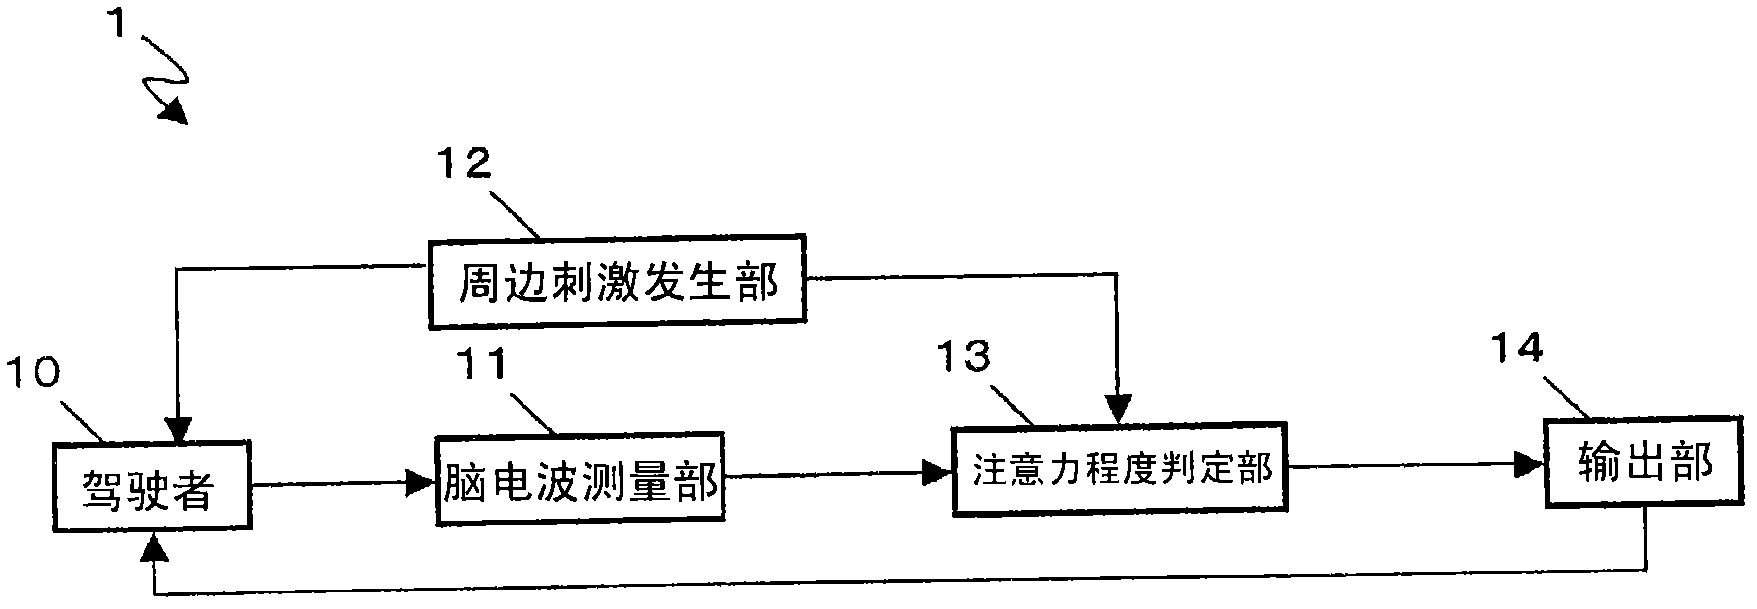 Driver awareness degree judgment device, method, and program